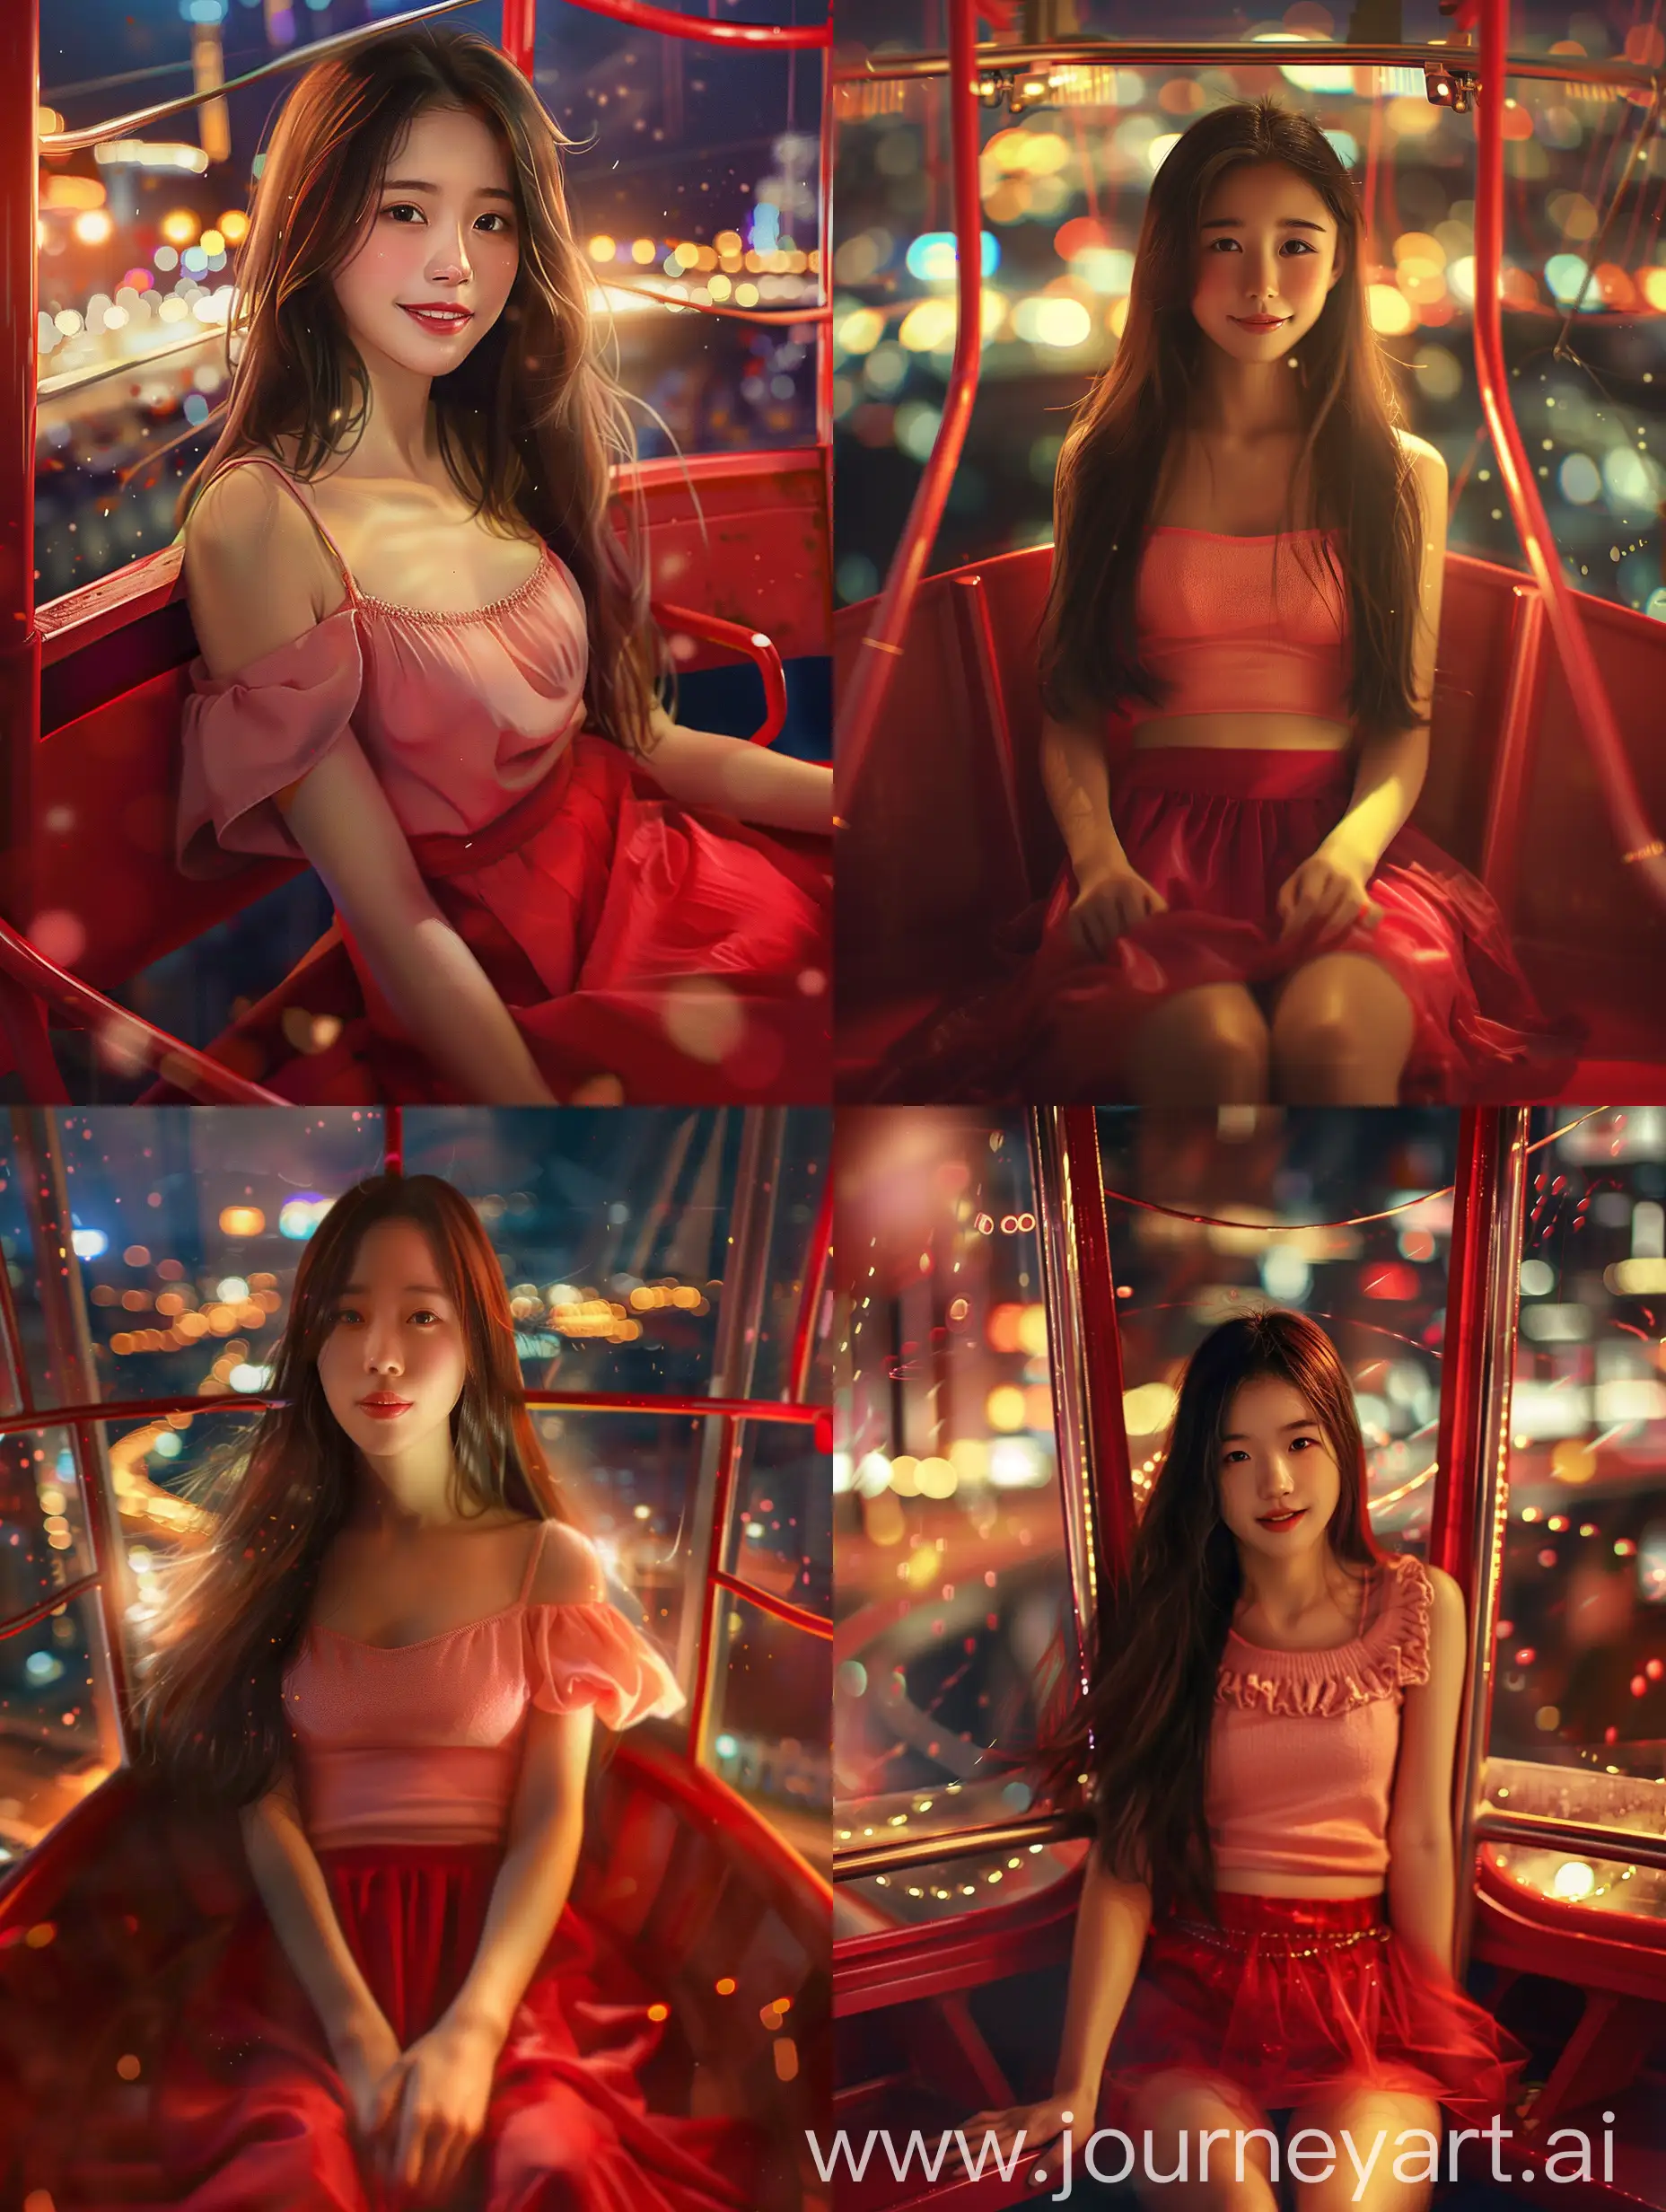  {"prompt":"An Asian girl with characteristic features is sitting indoors on a red ferry-like seat. She's wearing a pink top and a red skirt, her long hair cascading down her shoulders, looking happy. The background is a blurred night scene, possibly seen through a window with city lights, creating a warm and joyful atmosphere. The setting should appear authentic and lifelike.","size":"1024x1024"}
